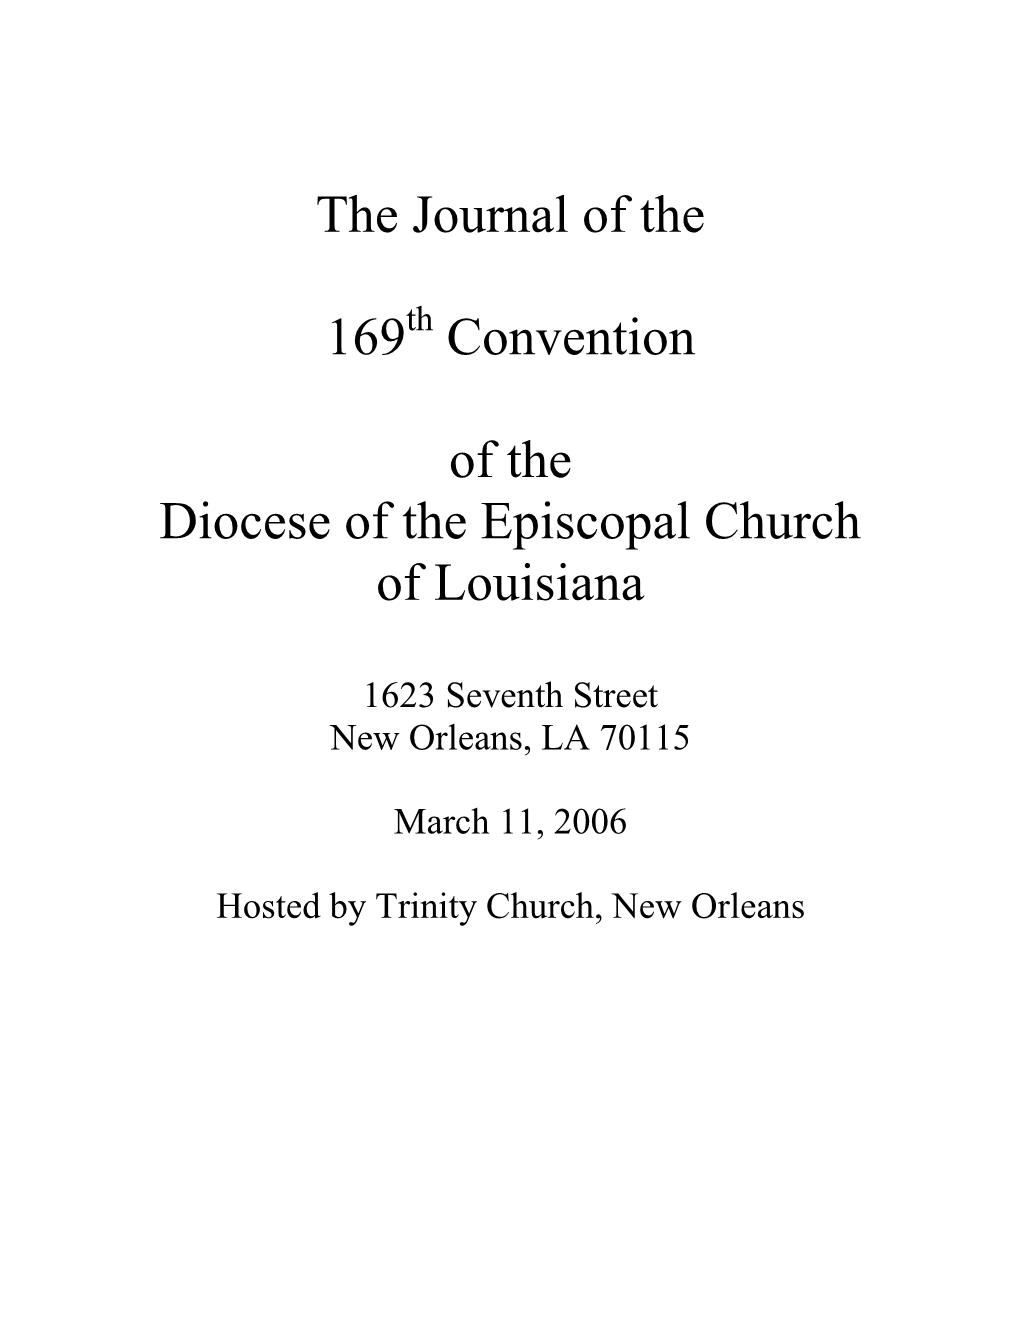 The Journal of the 169 Convention of the Diocese of the Episcopal